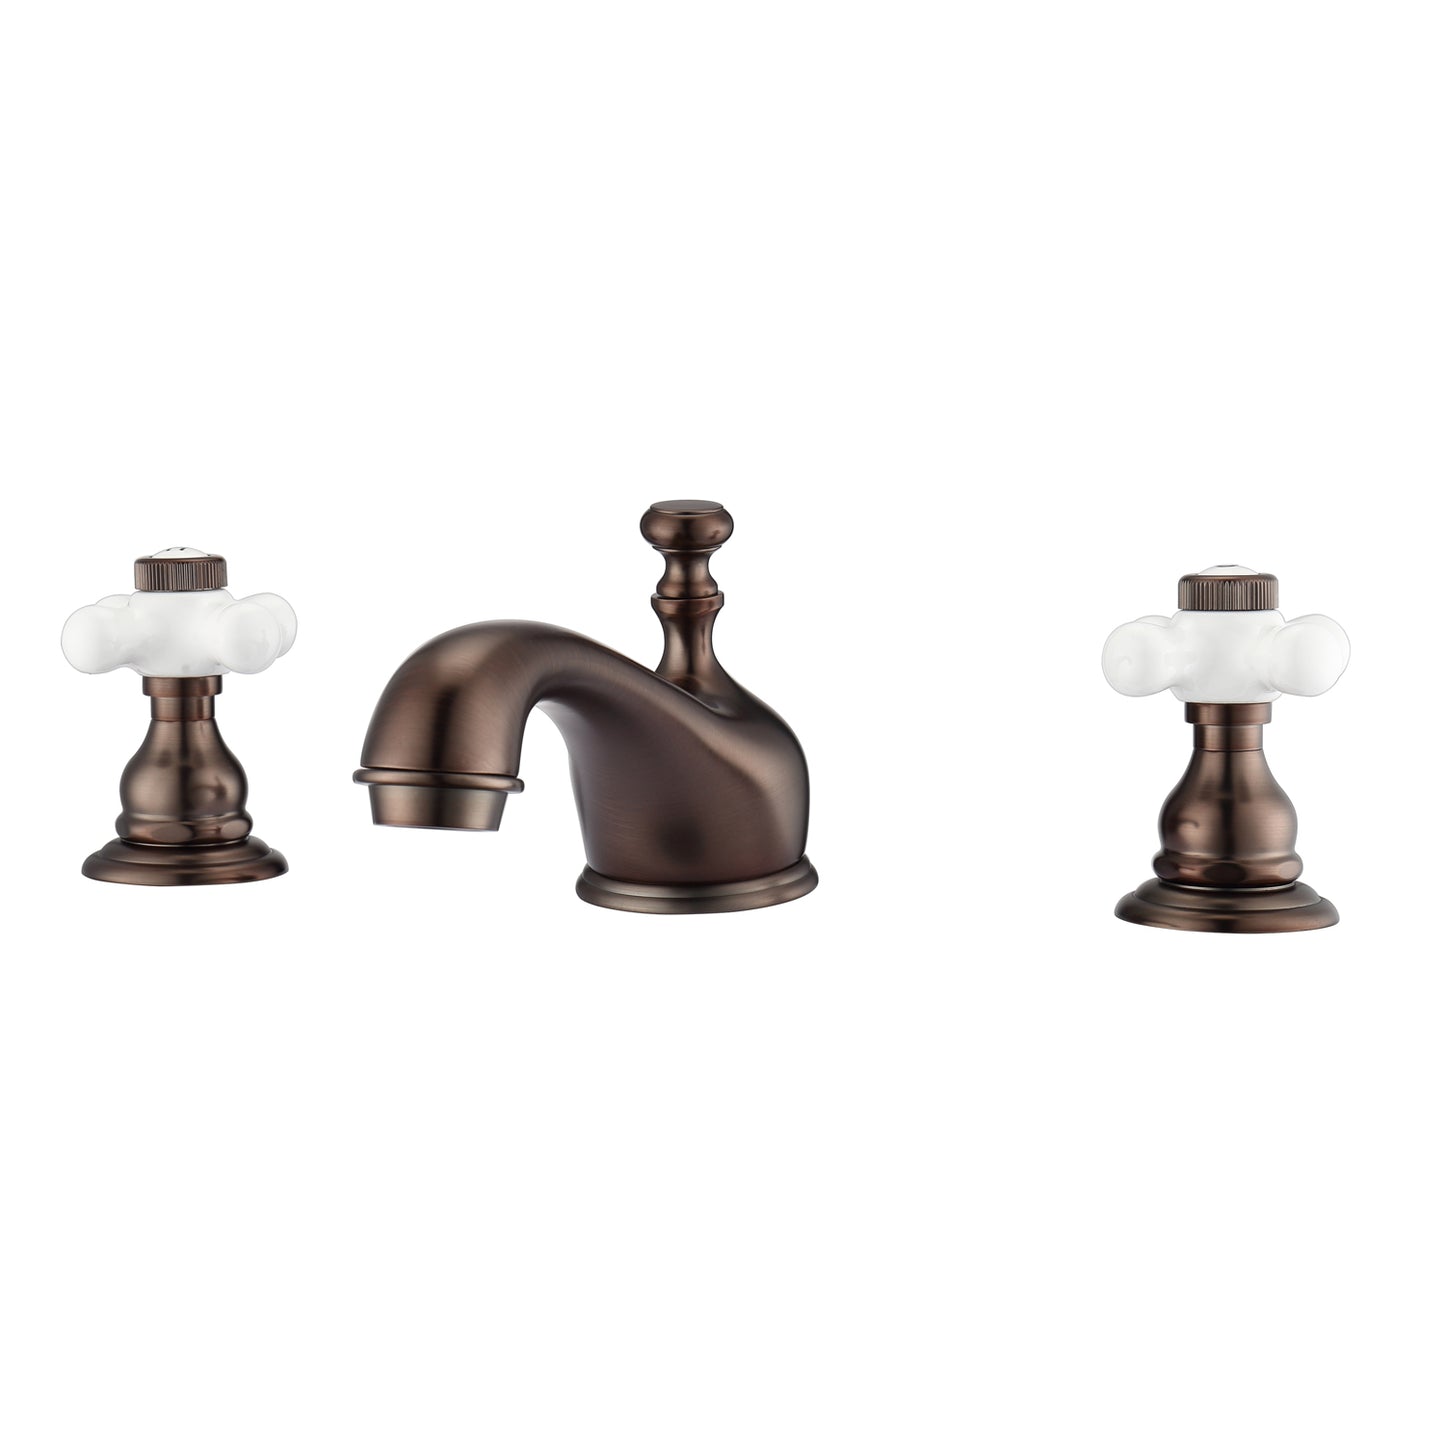 Marsala 8" Widespread Oil Rubbed Bronze Bathroom Faucet with Porcelain Cross Handles